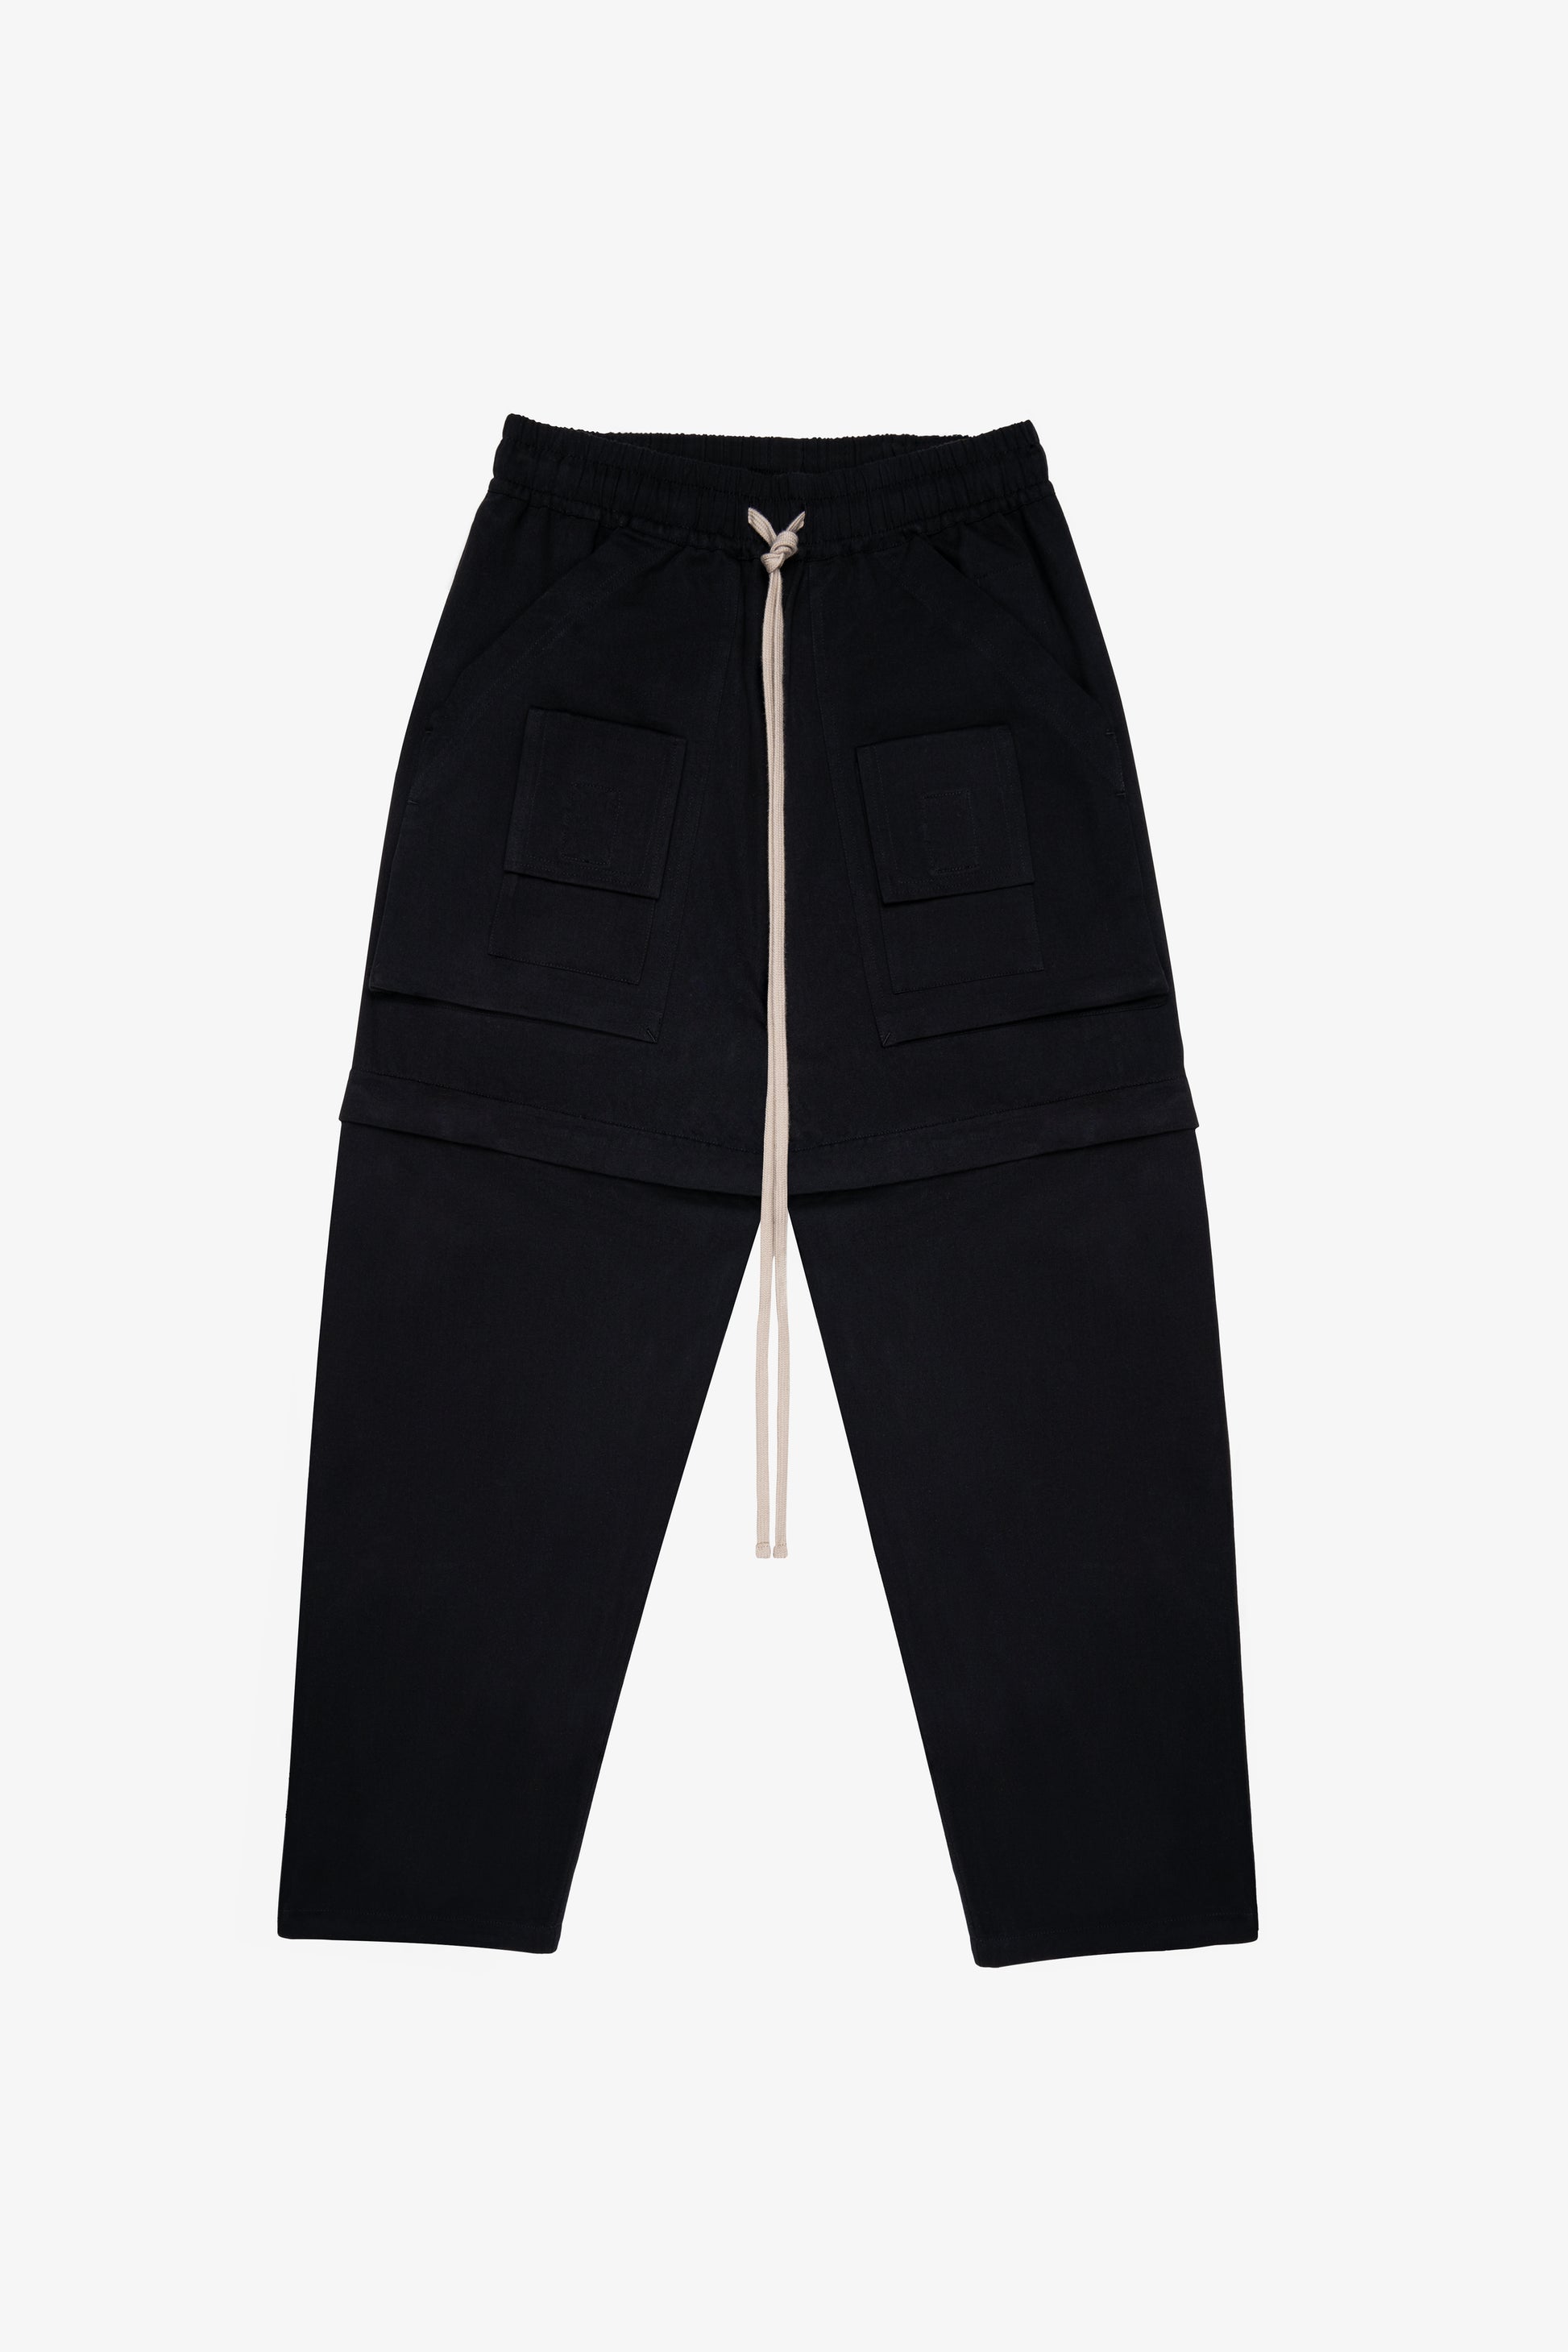 Front of black convertible pants ovnnie